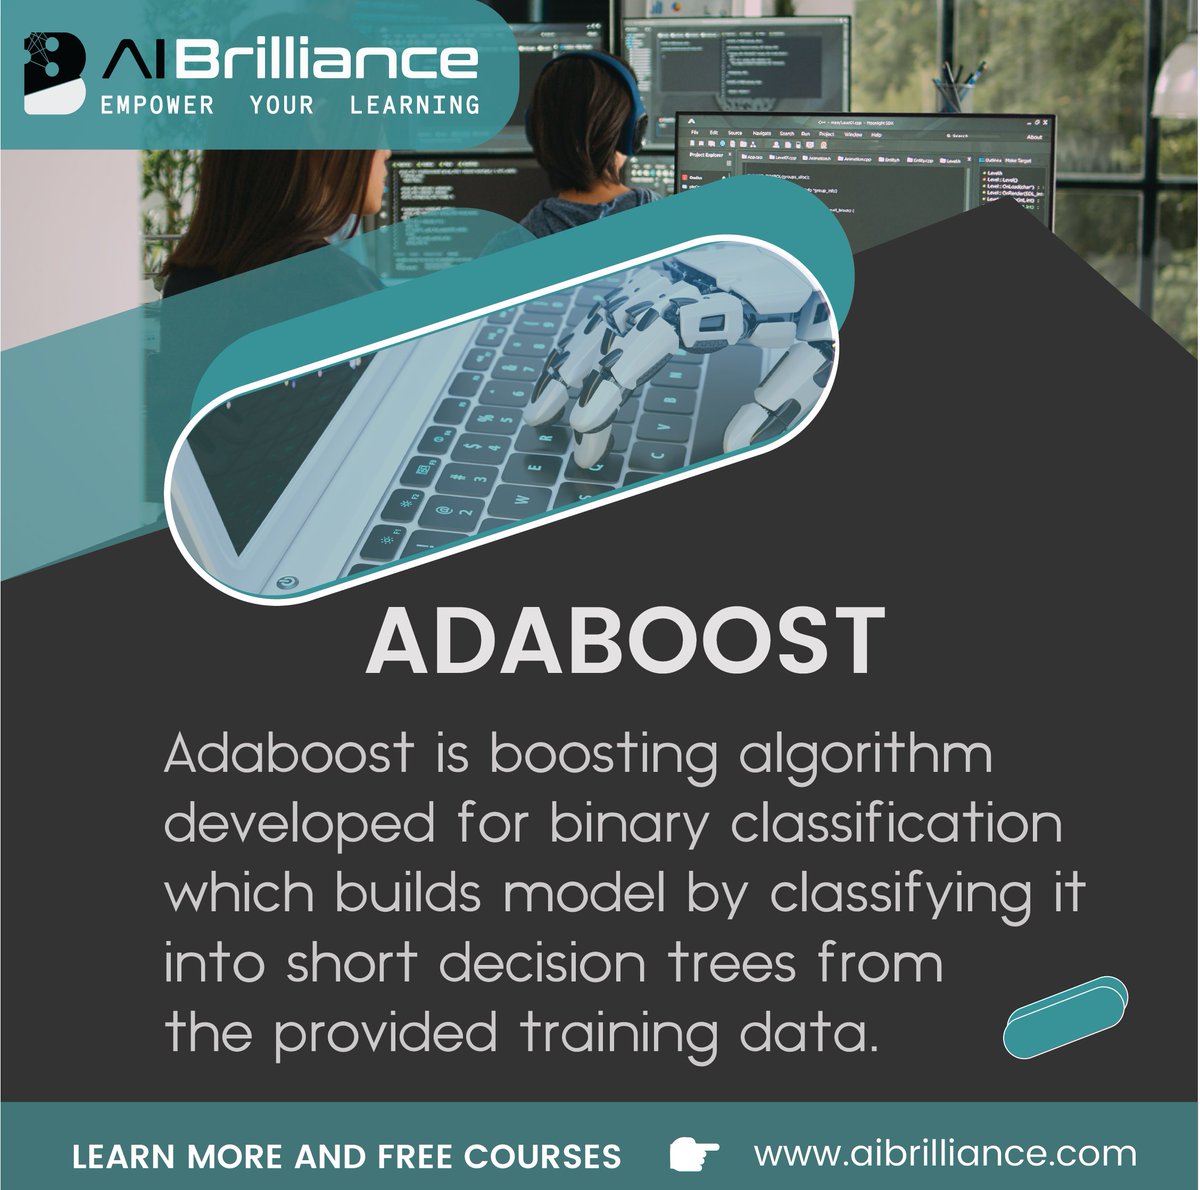 Boosting Up Your Knowledge with AdaBoost! 🚀💡 #AdaBoost #MachineLearning #Algorithms #DataScience #EnsembleLearning #AI #Insights #Algorithm #Data #ML #Innovation  #DataDriven #MLLearning #DataScientists #ModelBoosting #DataAnalysis